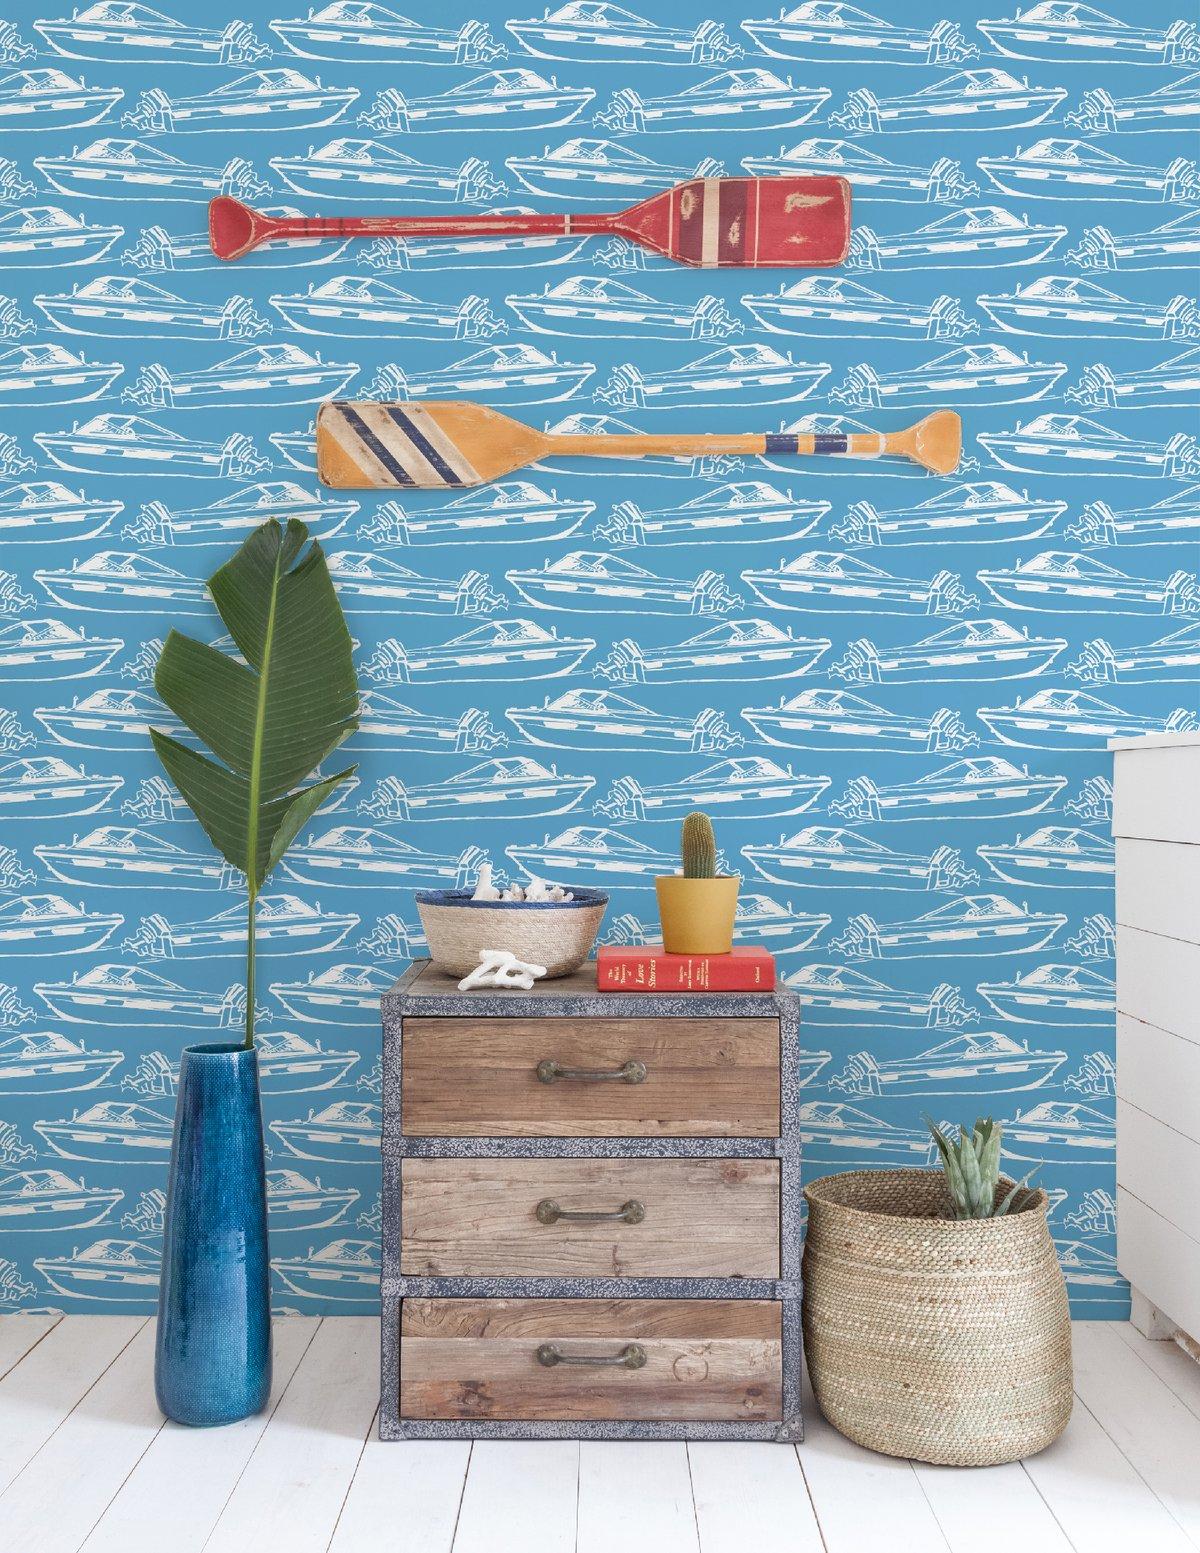 This beautiful speedboat wallpaper is a collaboration with Finnish designer Paola Suhonen of Ivana Helsinki.
 
Printing: Digital pigment print (minimum order of 4 rolls), or screen-printed by hand (minimum order and setup fees apply).
Material: